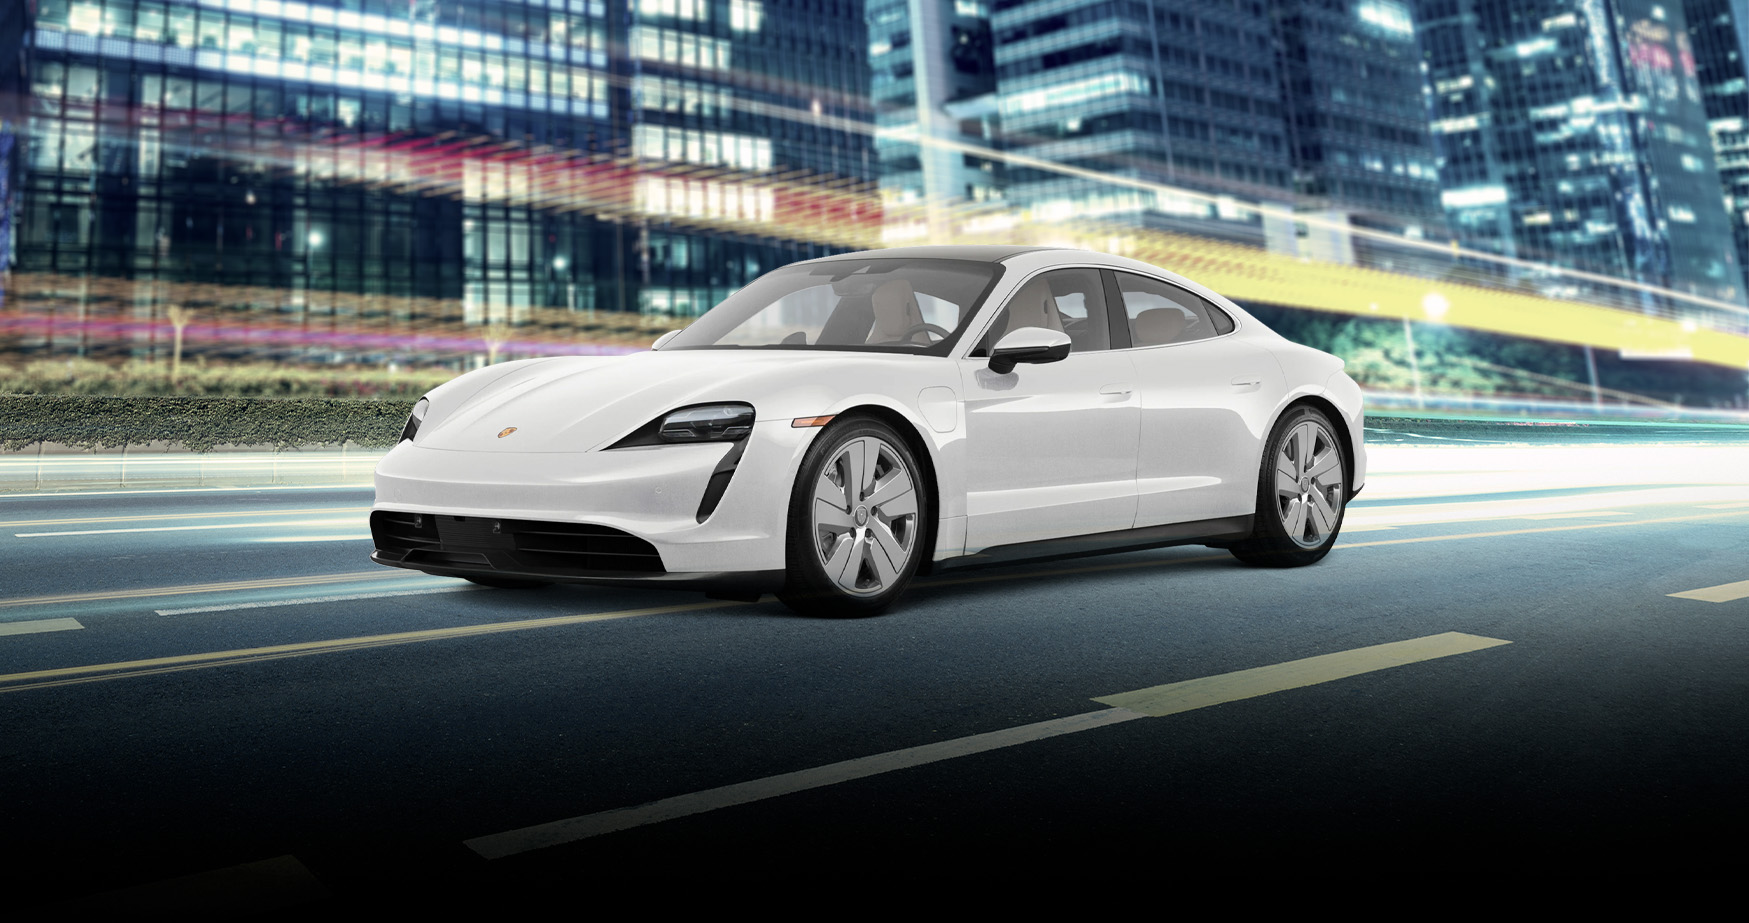 The future has arrived with the most recent electric Porsche driving experience. Find the Porsche Taycan for sale at Porsche Naples, your nearest Porsche Center in Collier County, Florida.